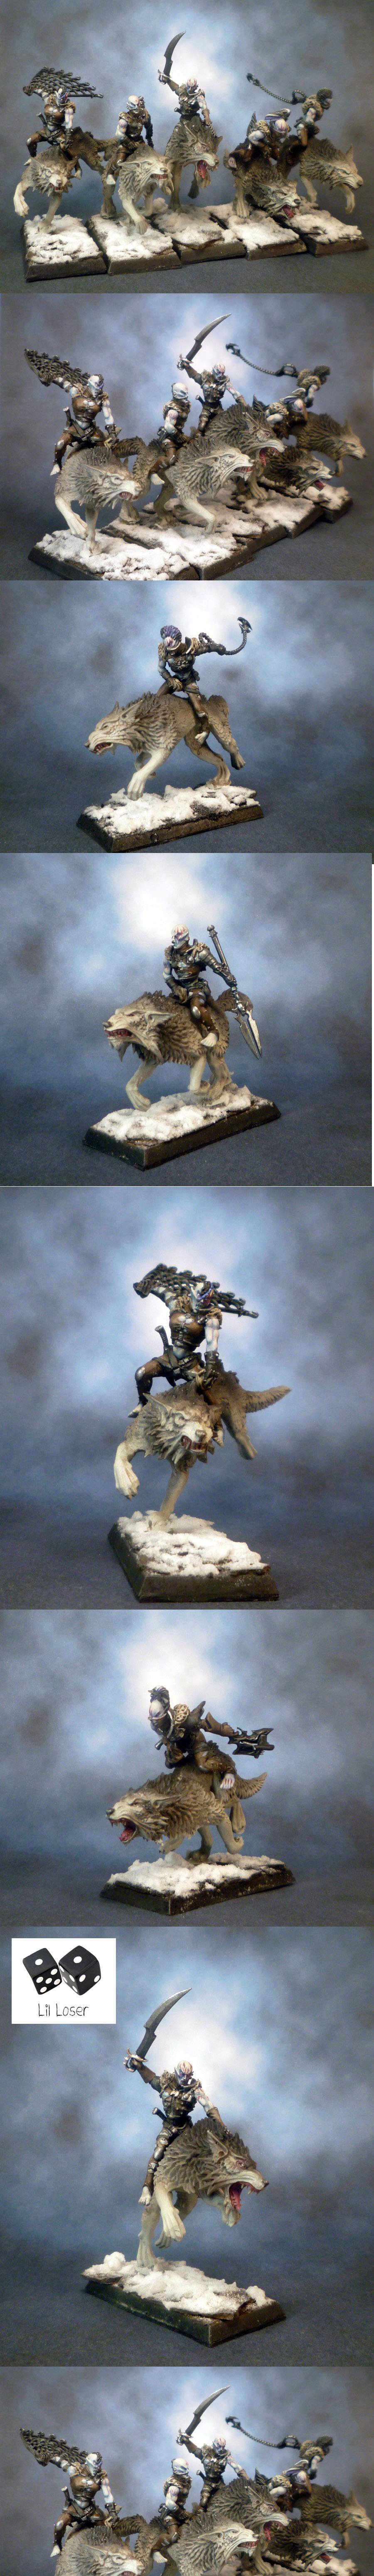 Dark Elves, Wolves, The Hounds of Naggarond; Converted Dark Riders